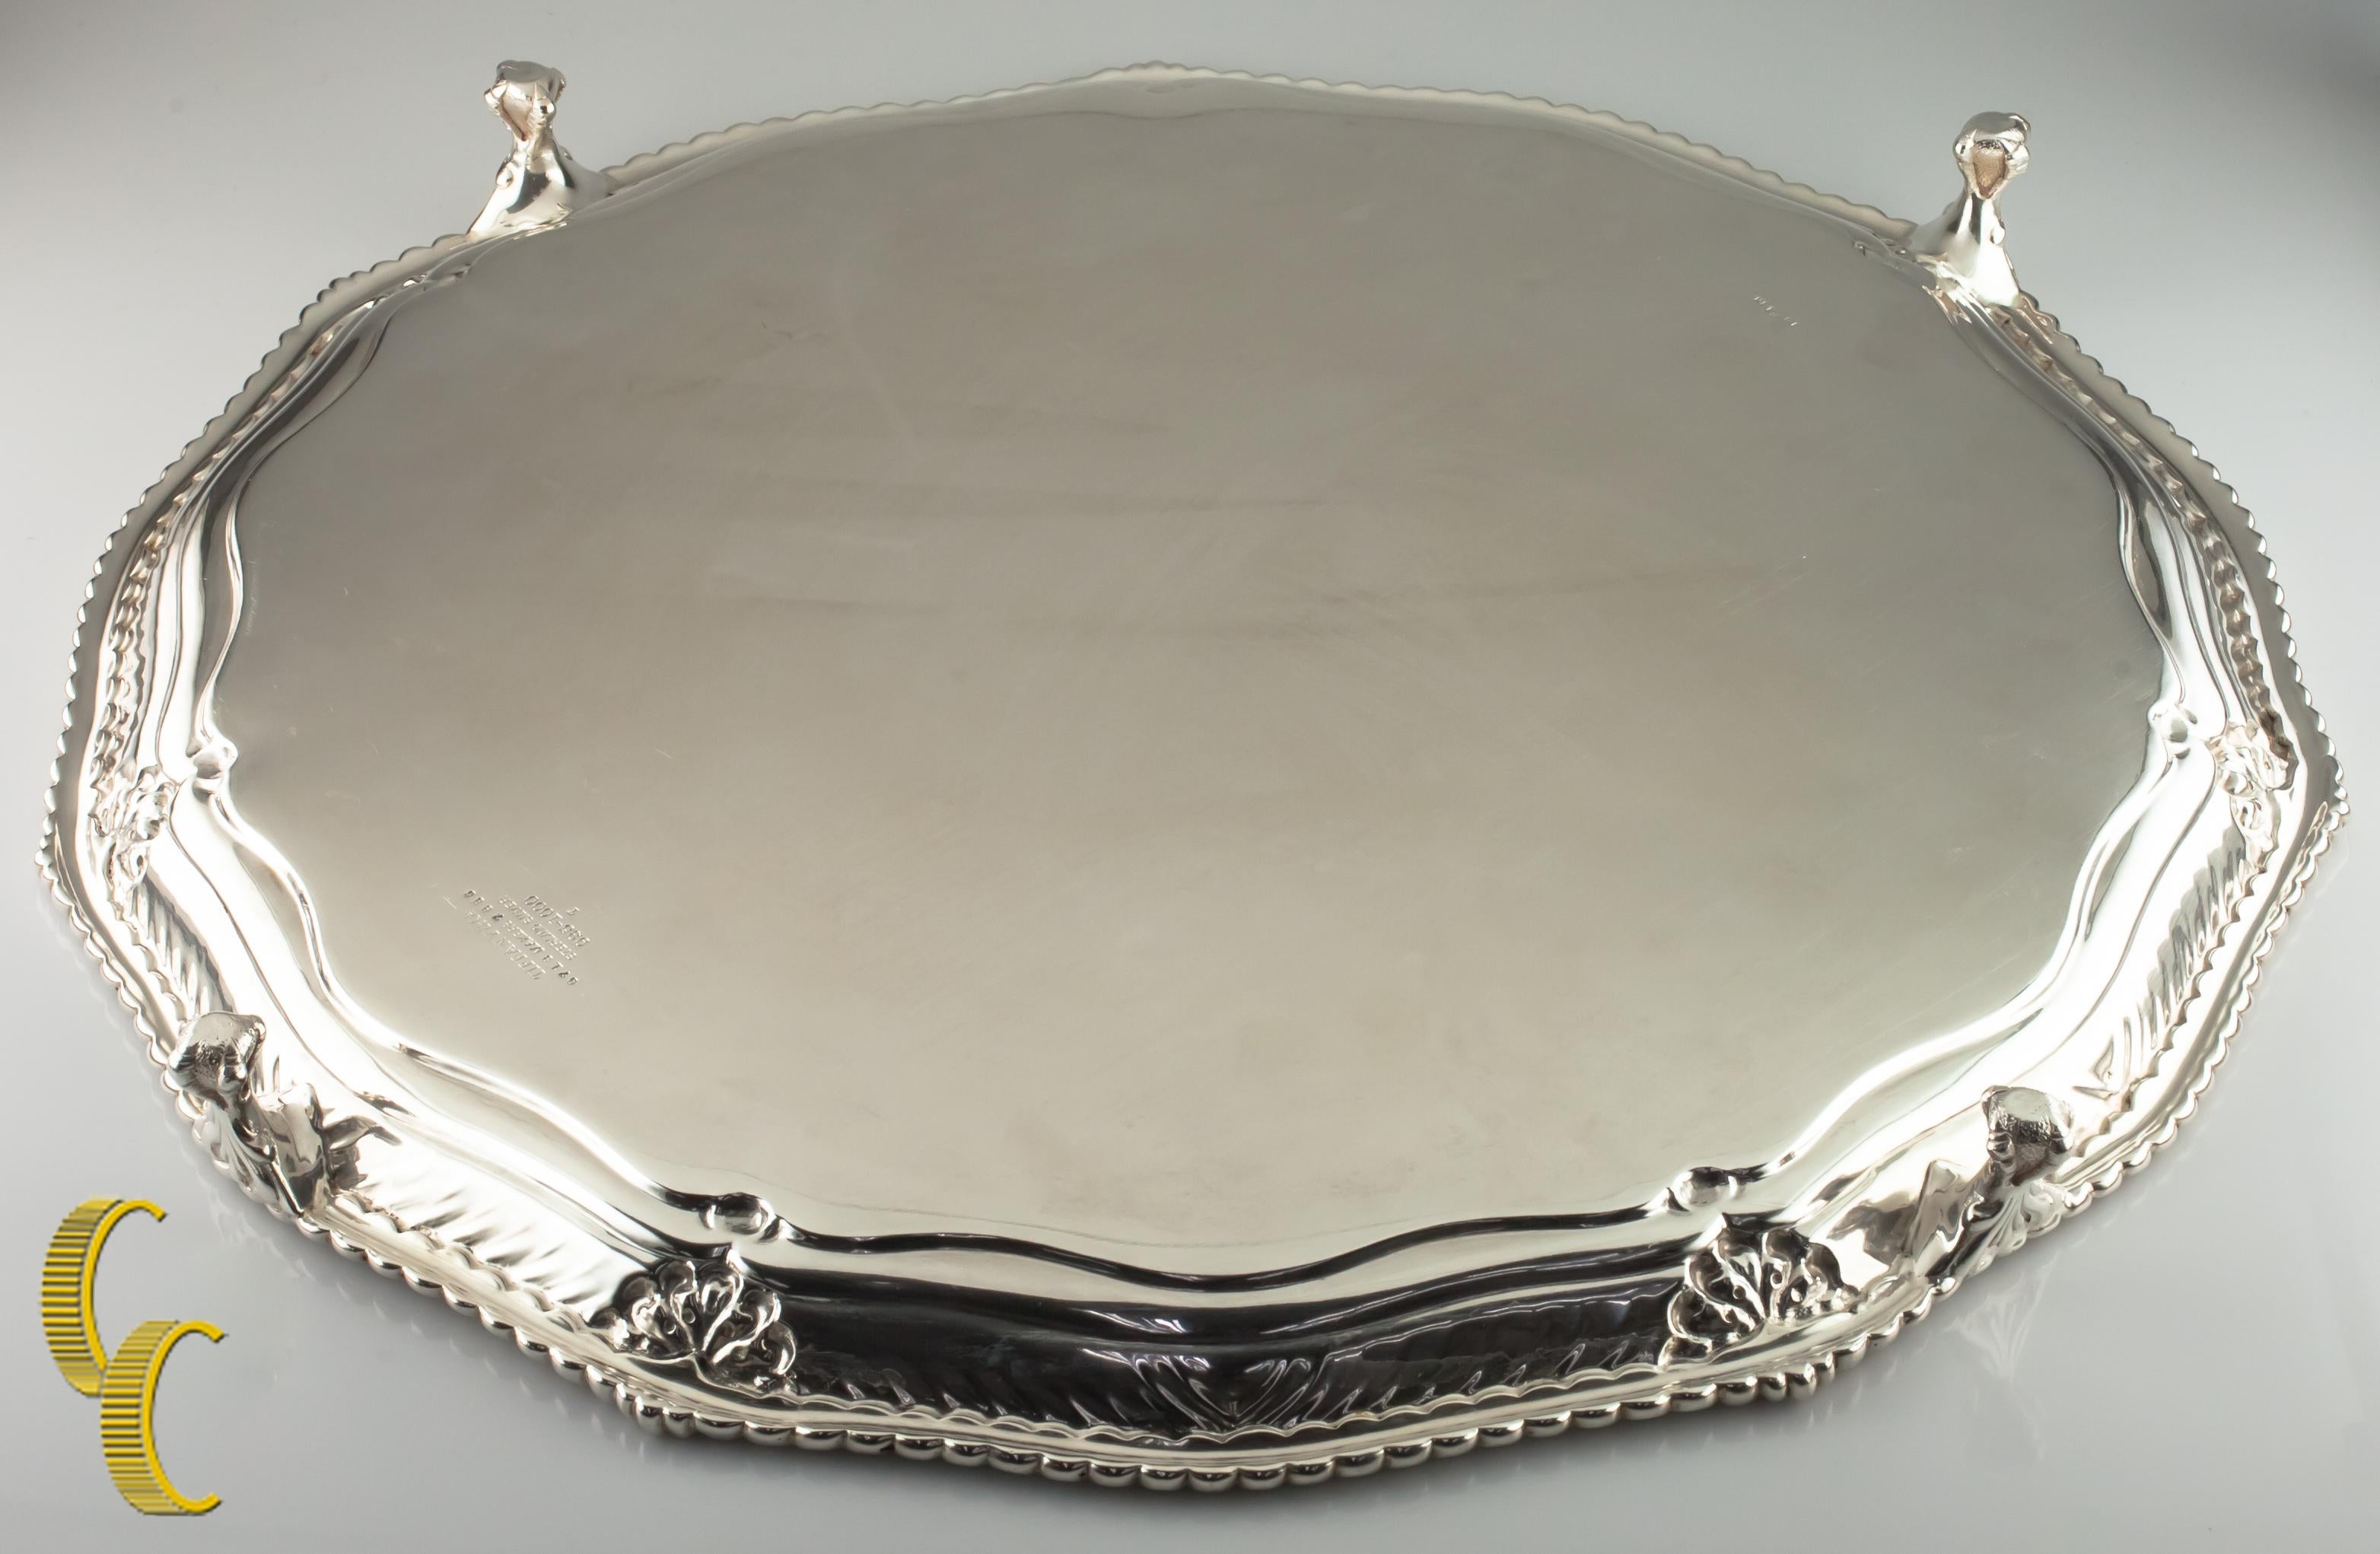 Gilded Age  Tiffany Makers Sterling Silver Large Footed Tray 1888 86.5 ounces Great Antique For Sale